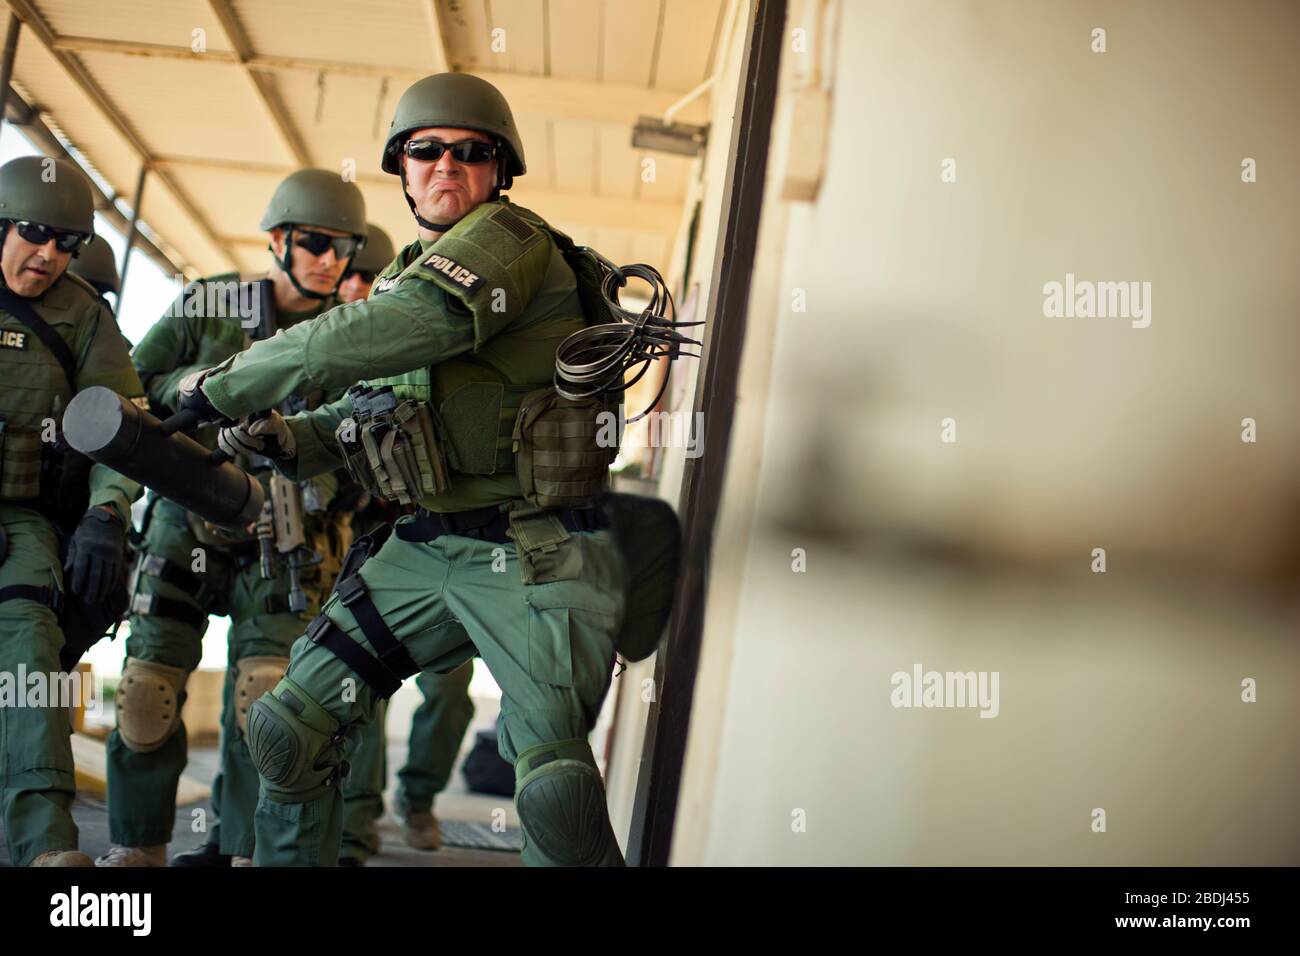 Group of police officers about to enter a building during an exercise at a training facility. Stock Photo